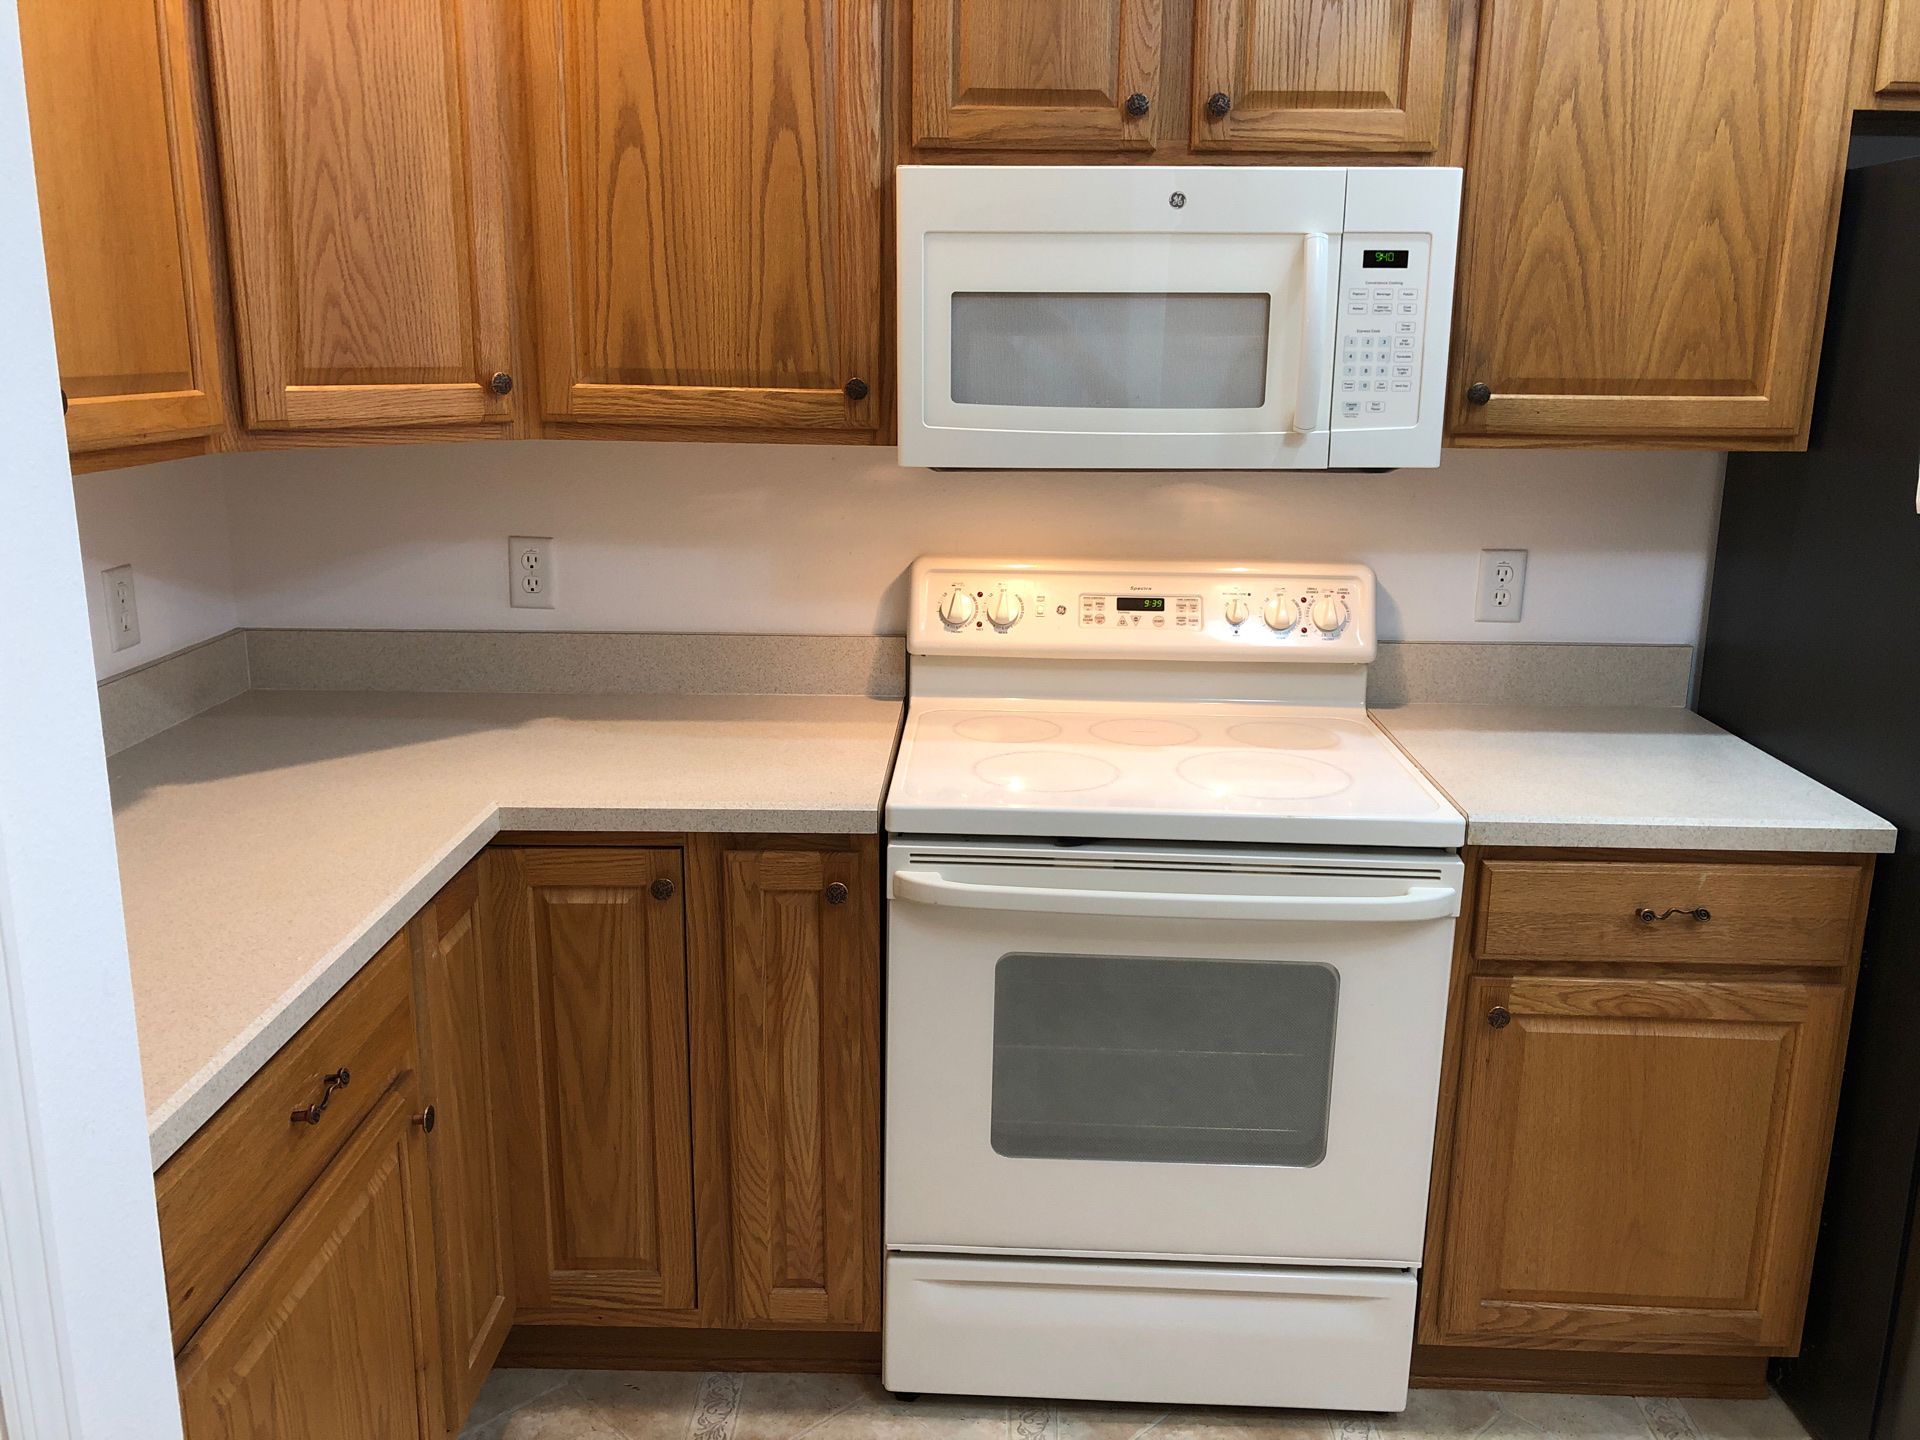 Laminate countertop and dishwasher, electric range and microwave